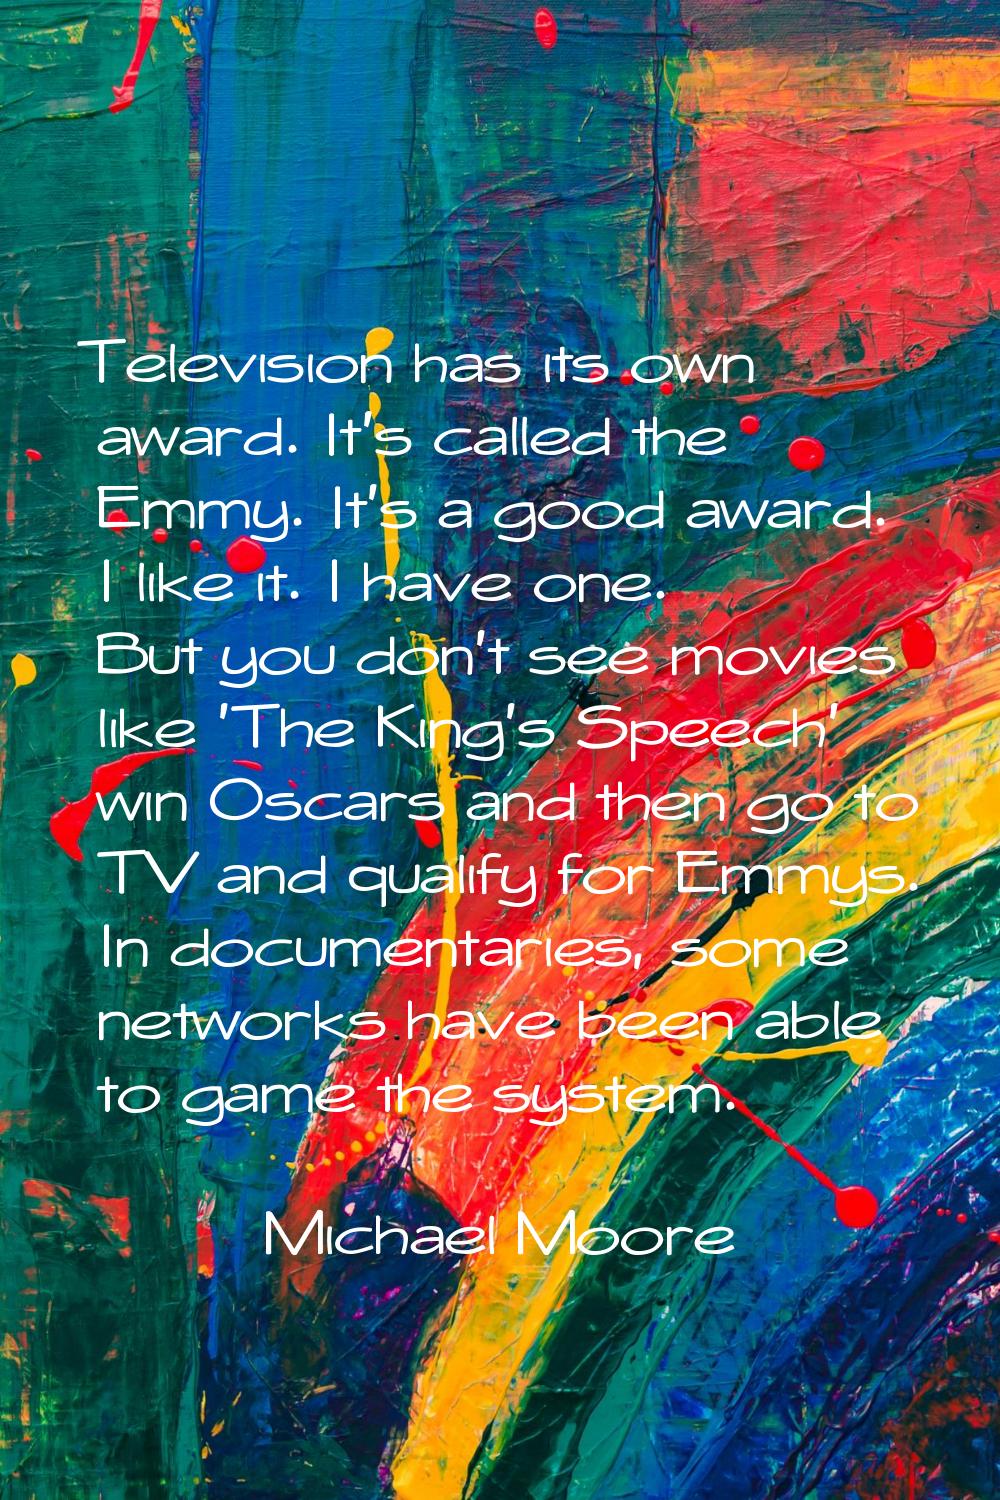 Television has its own award. It's called the Emmy. It's a good award. I like it. I have one. But y